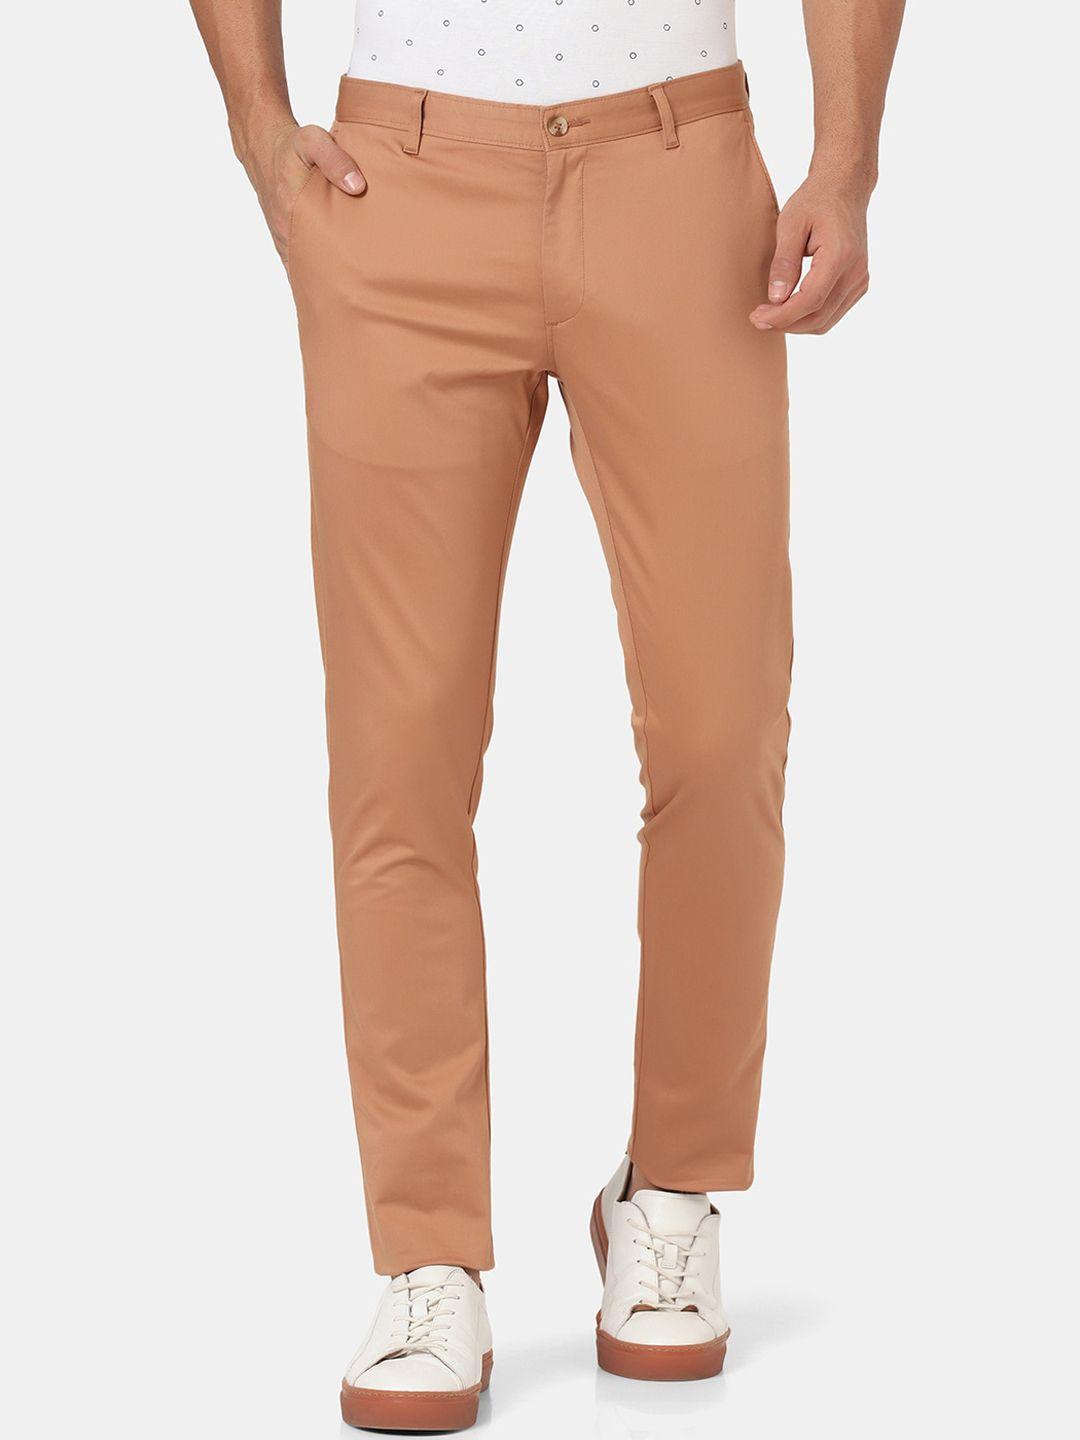 blackberrys men peach-coloured slim fit low-rise chinos trousers